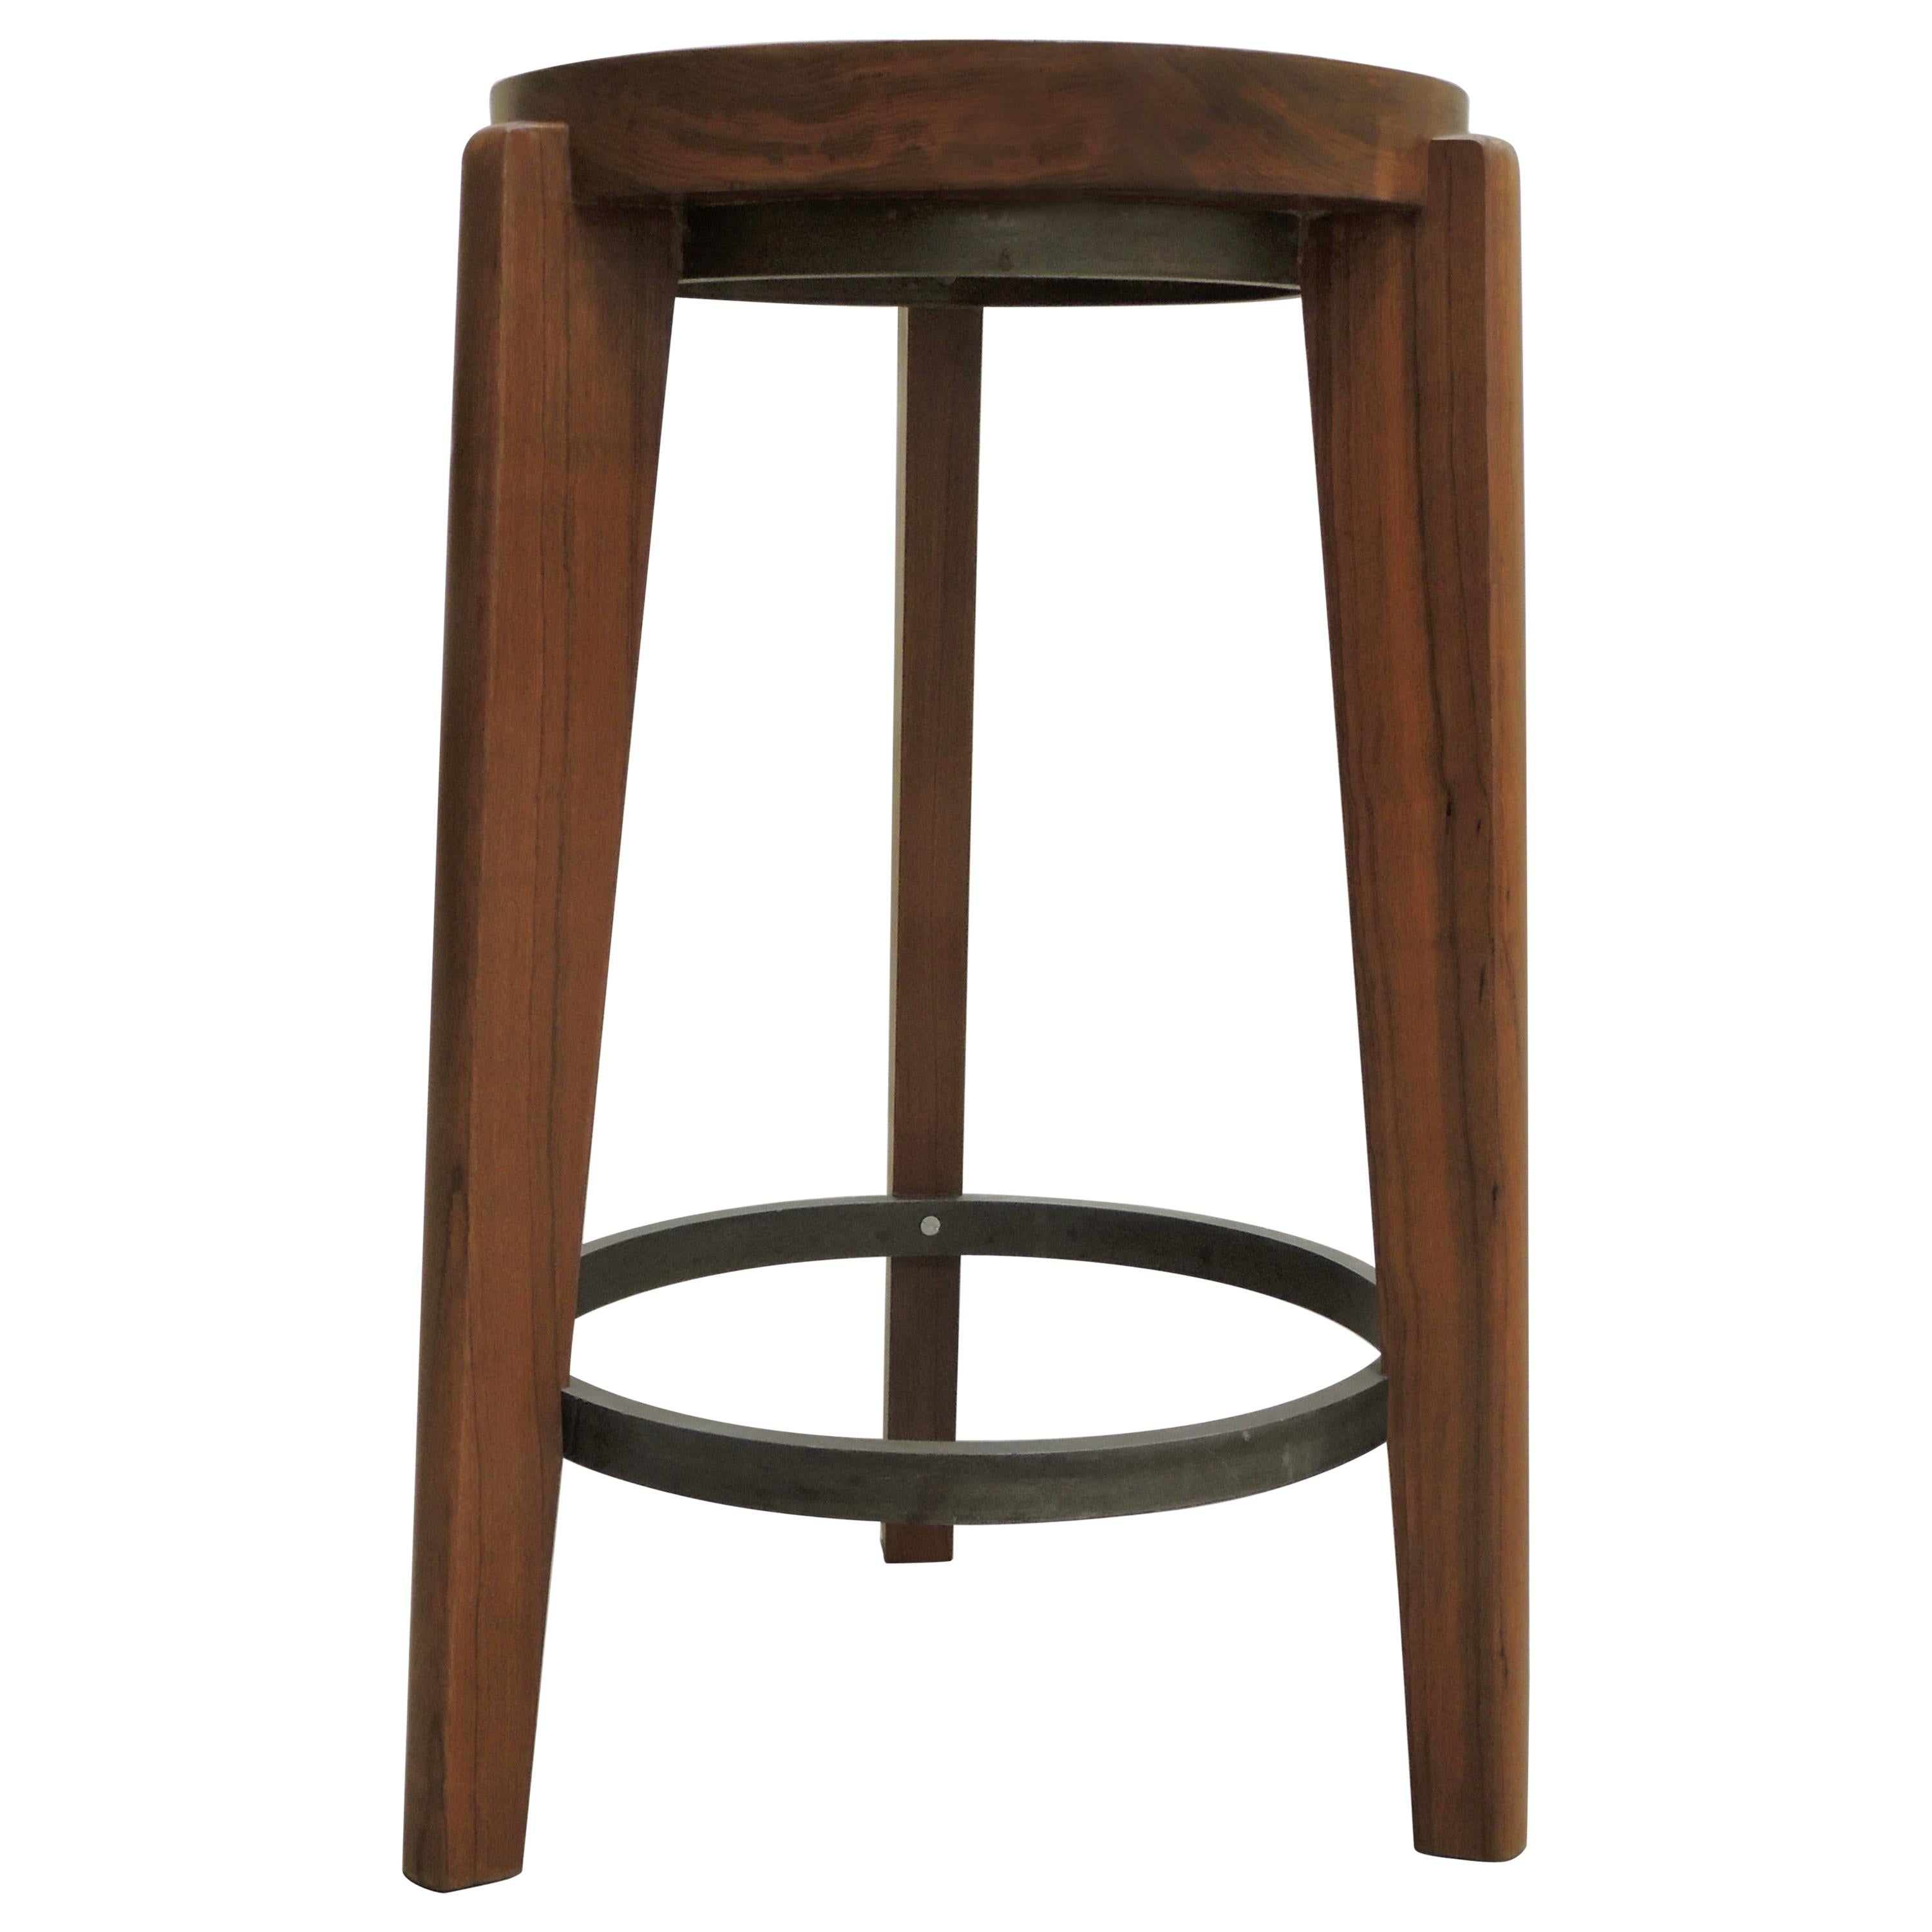 Pierre Jeanneret's Side Table/Stool, Hand-Sculpted Contemporary Reedition